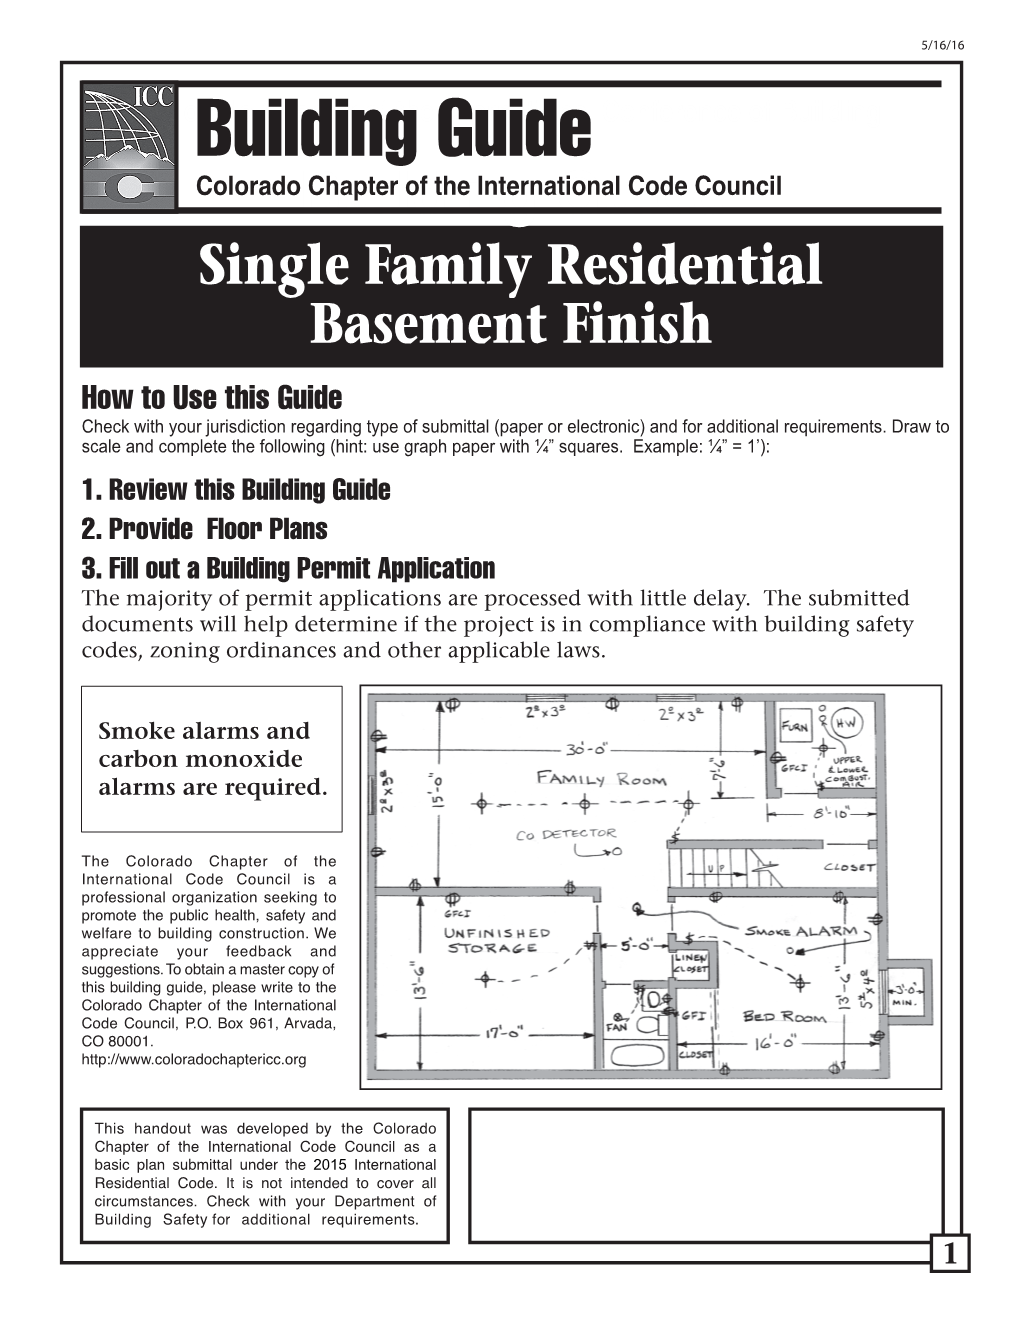 Basement Finish How to Use This Guide Check with Your Jurisdiction Regarding Type of Submittal (Paper Or Electronic) and for Additional Requirements